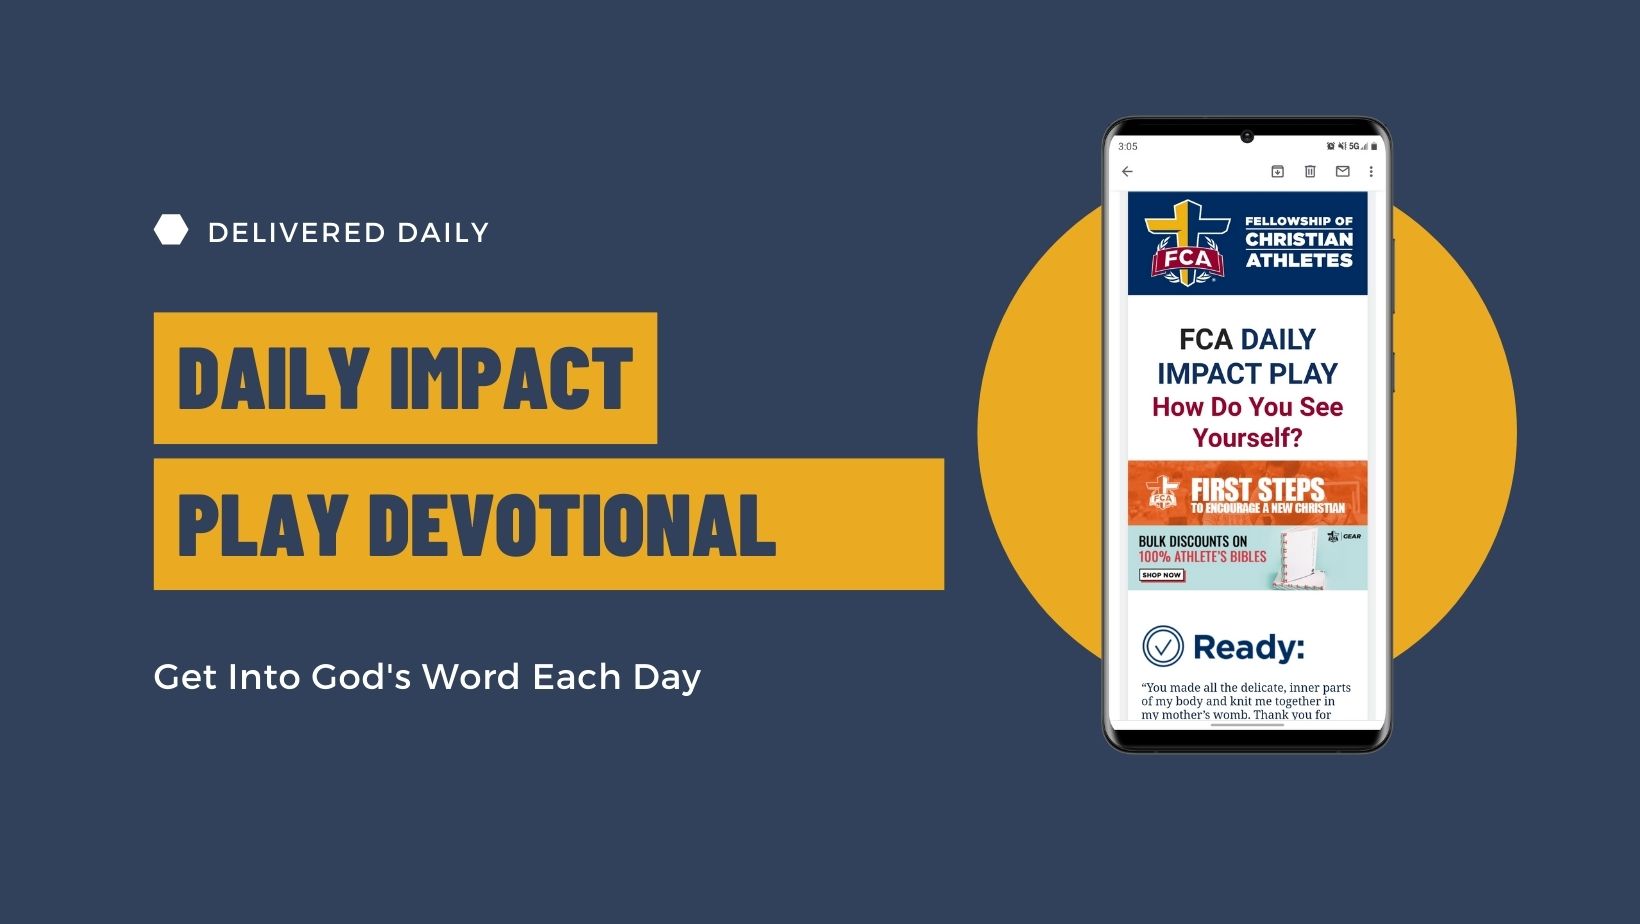 FCA Daily Impact Play